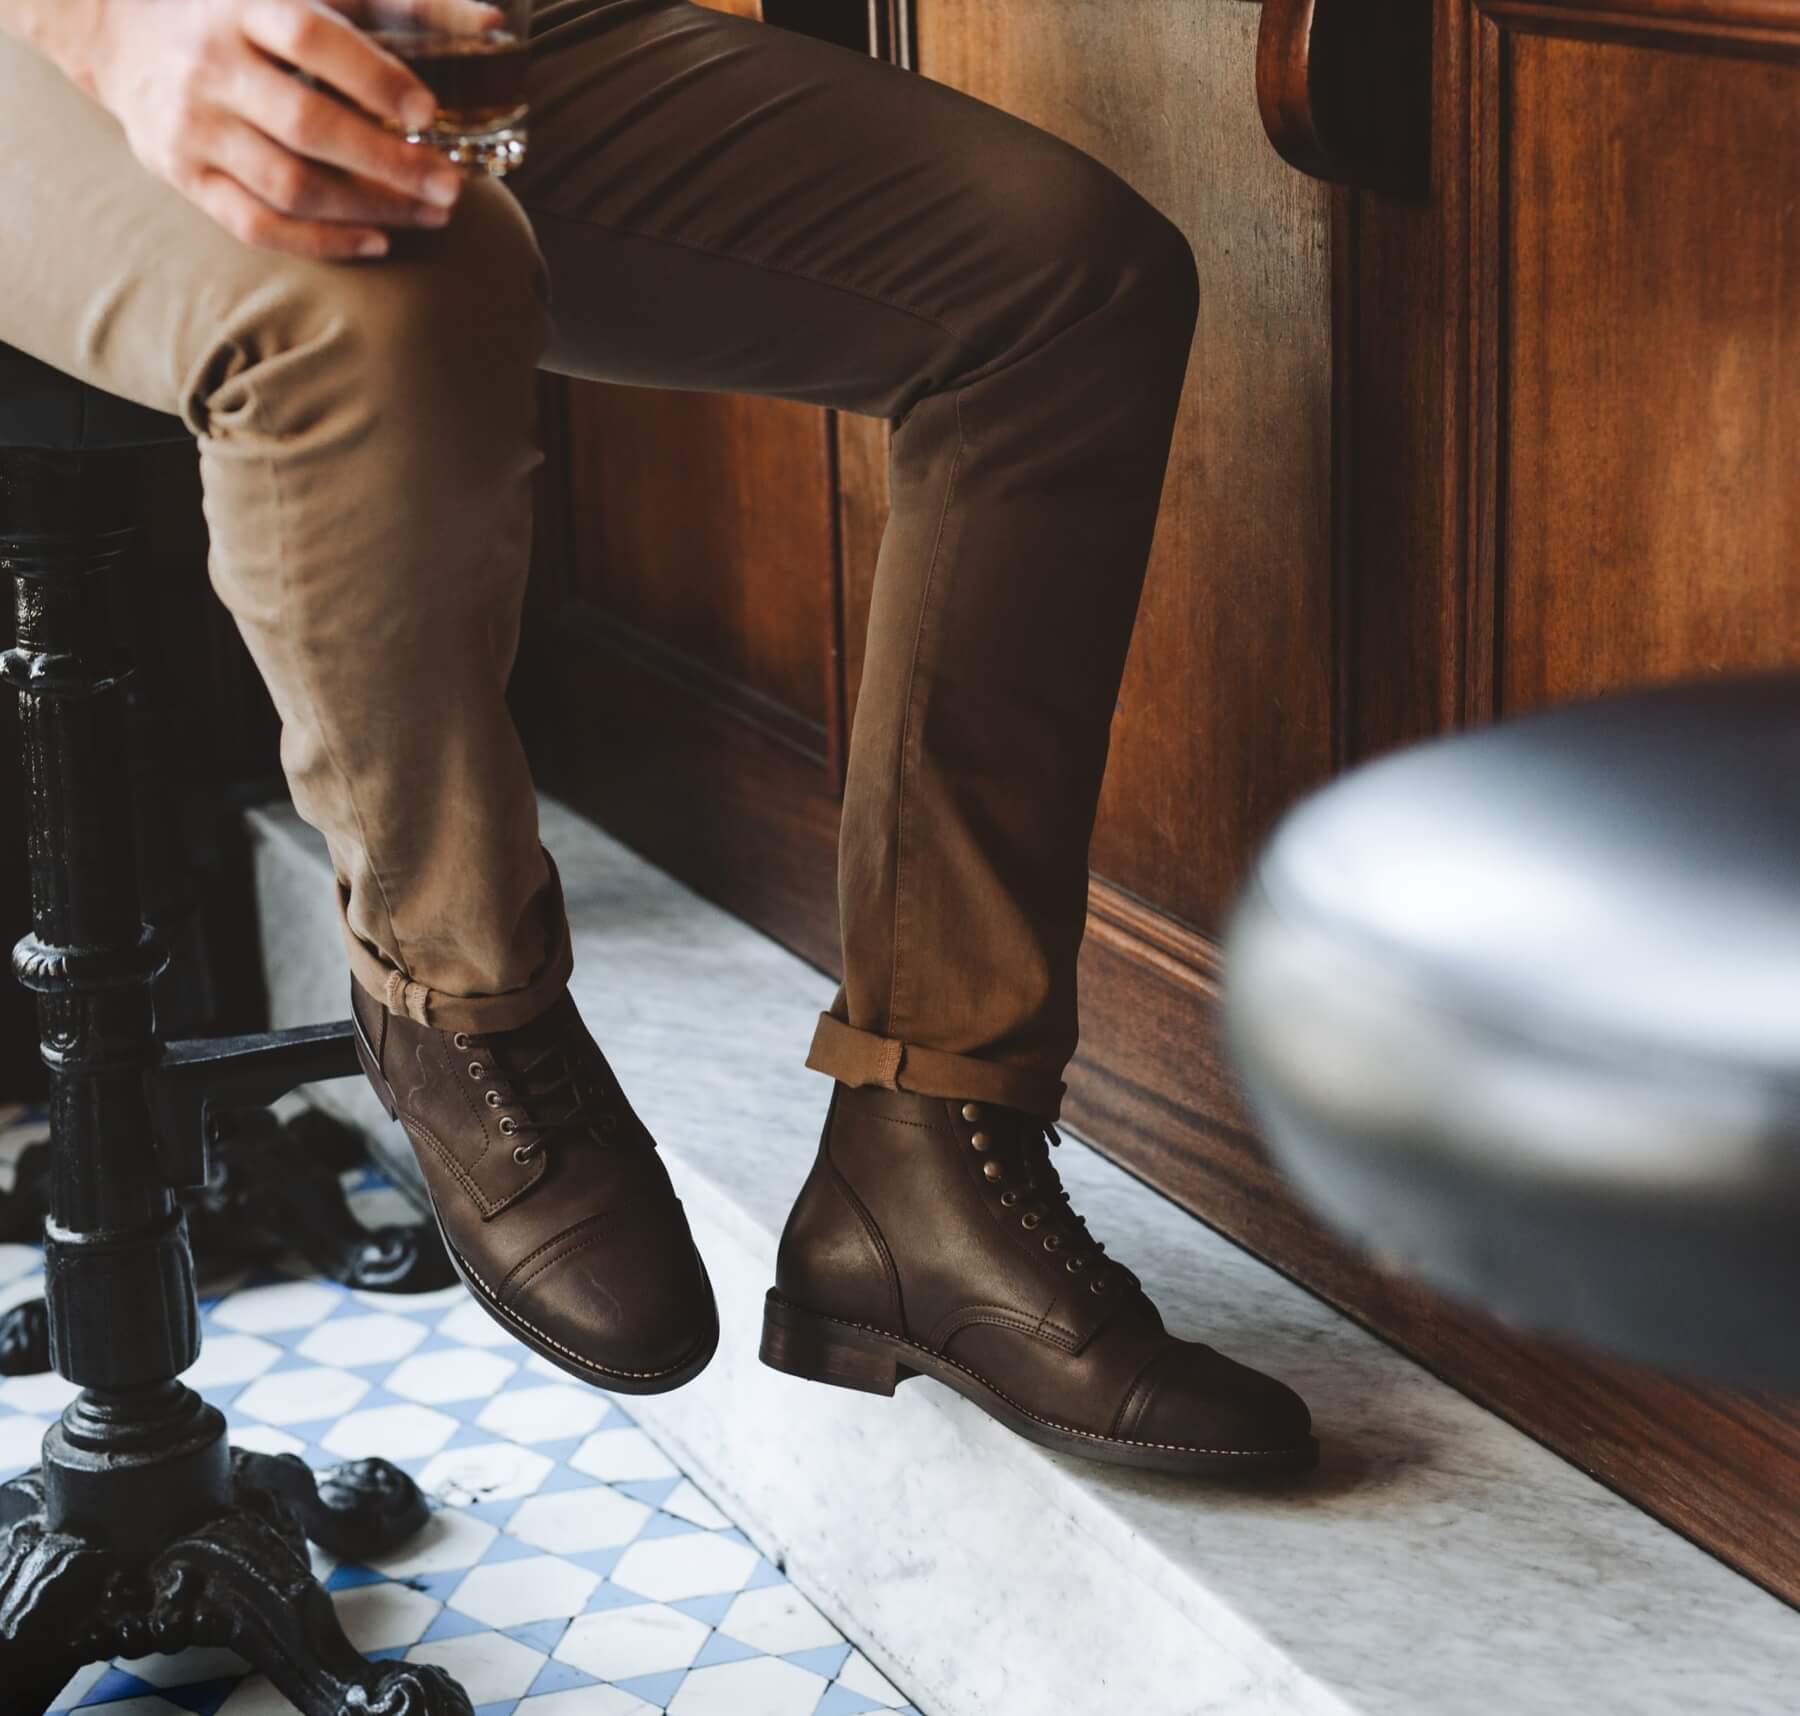 Sophisticated Steer get annoyed Best Men's Spring Leather Boots for Transitional Weather | Valet.